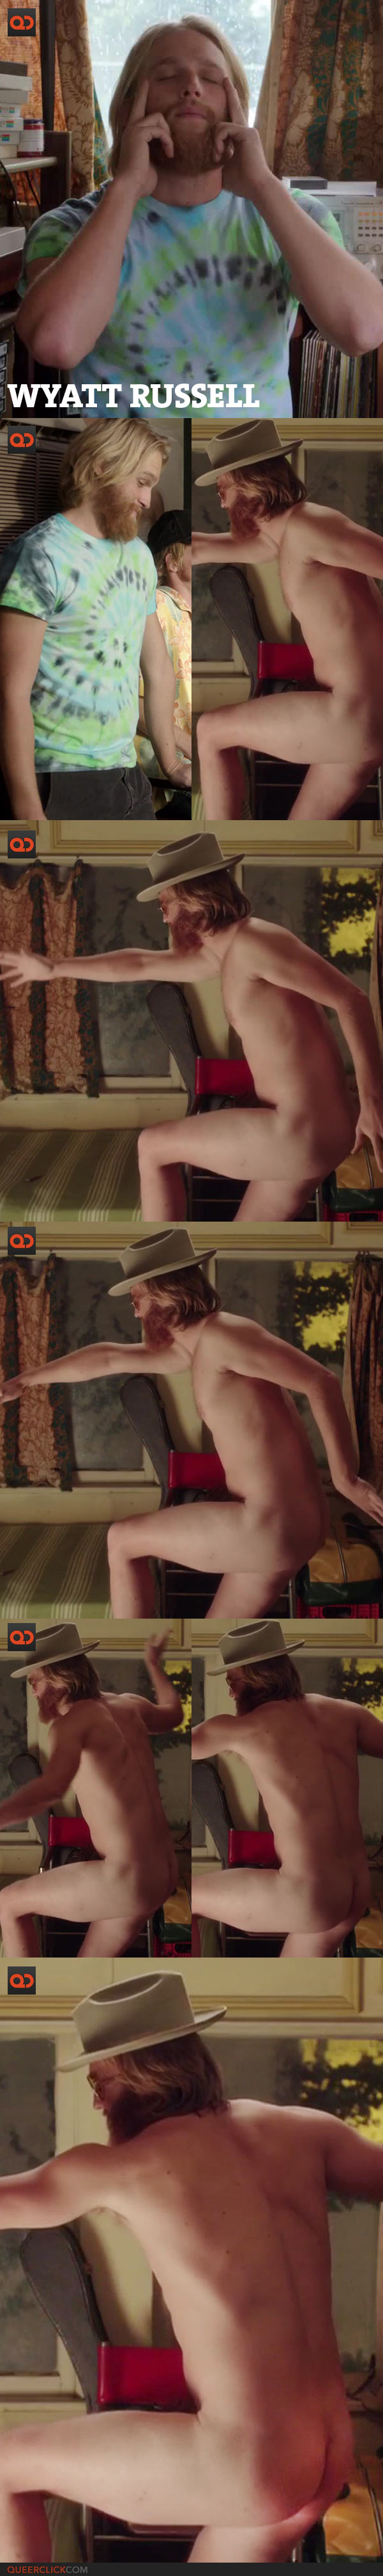 qc-ryan_guzman_wyatt_russell_and-tanner_kalina-go-butt_naked_in-everybody_wants_some-collage04